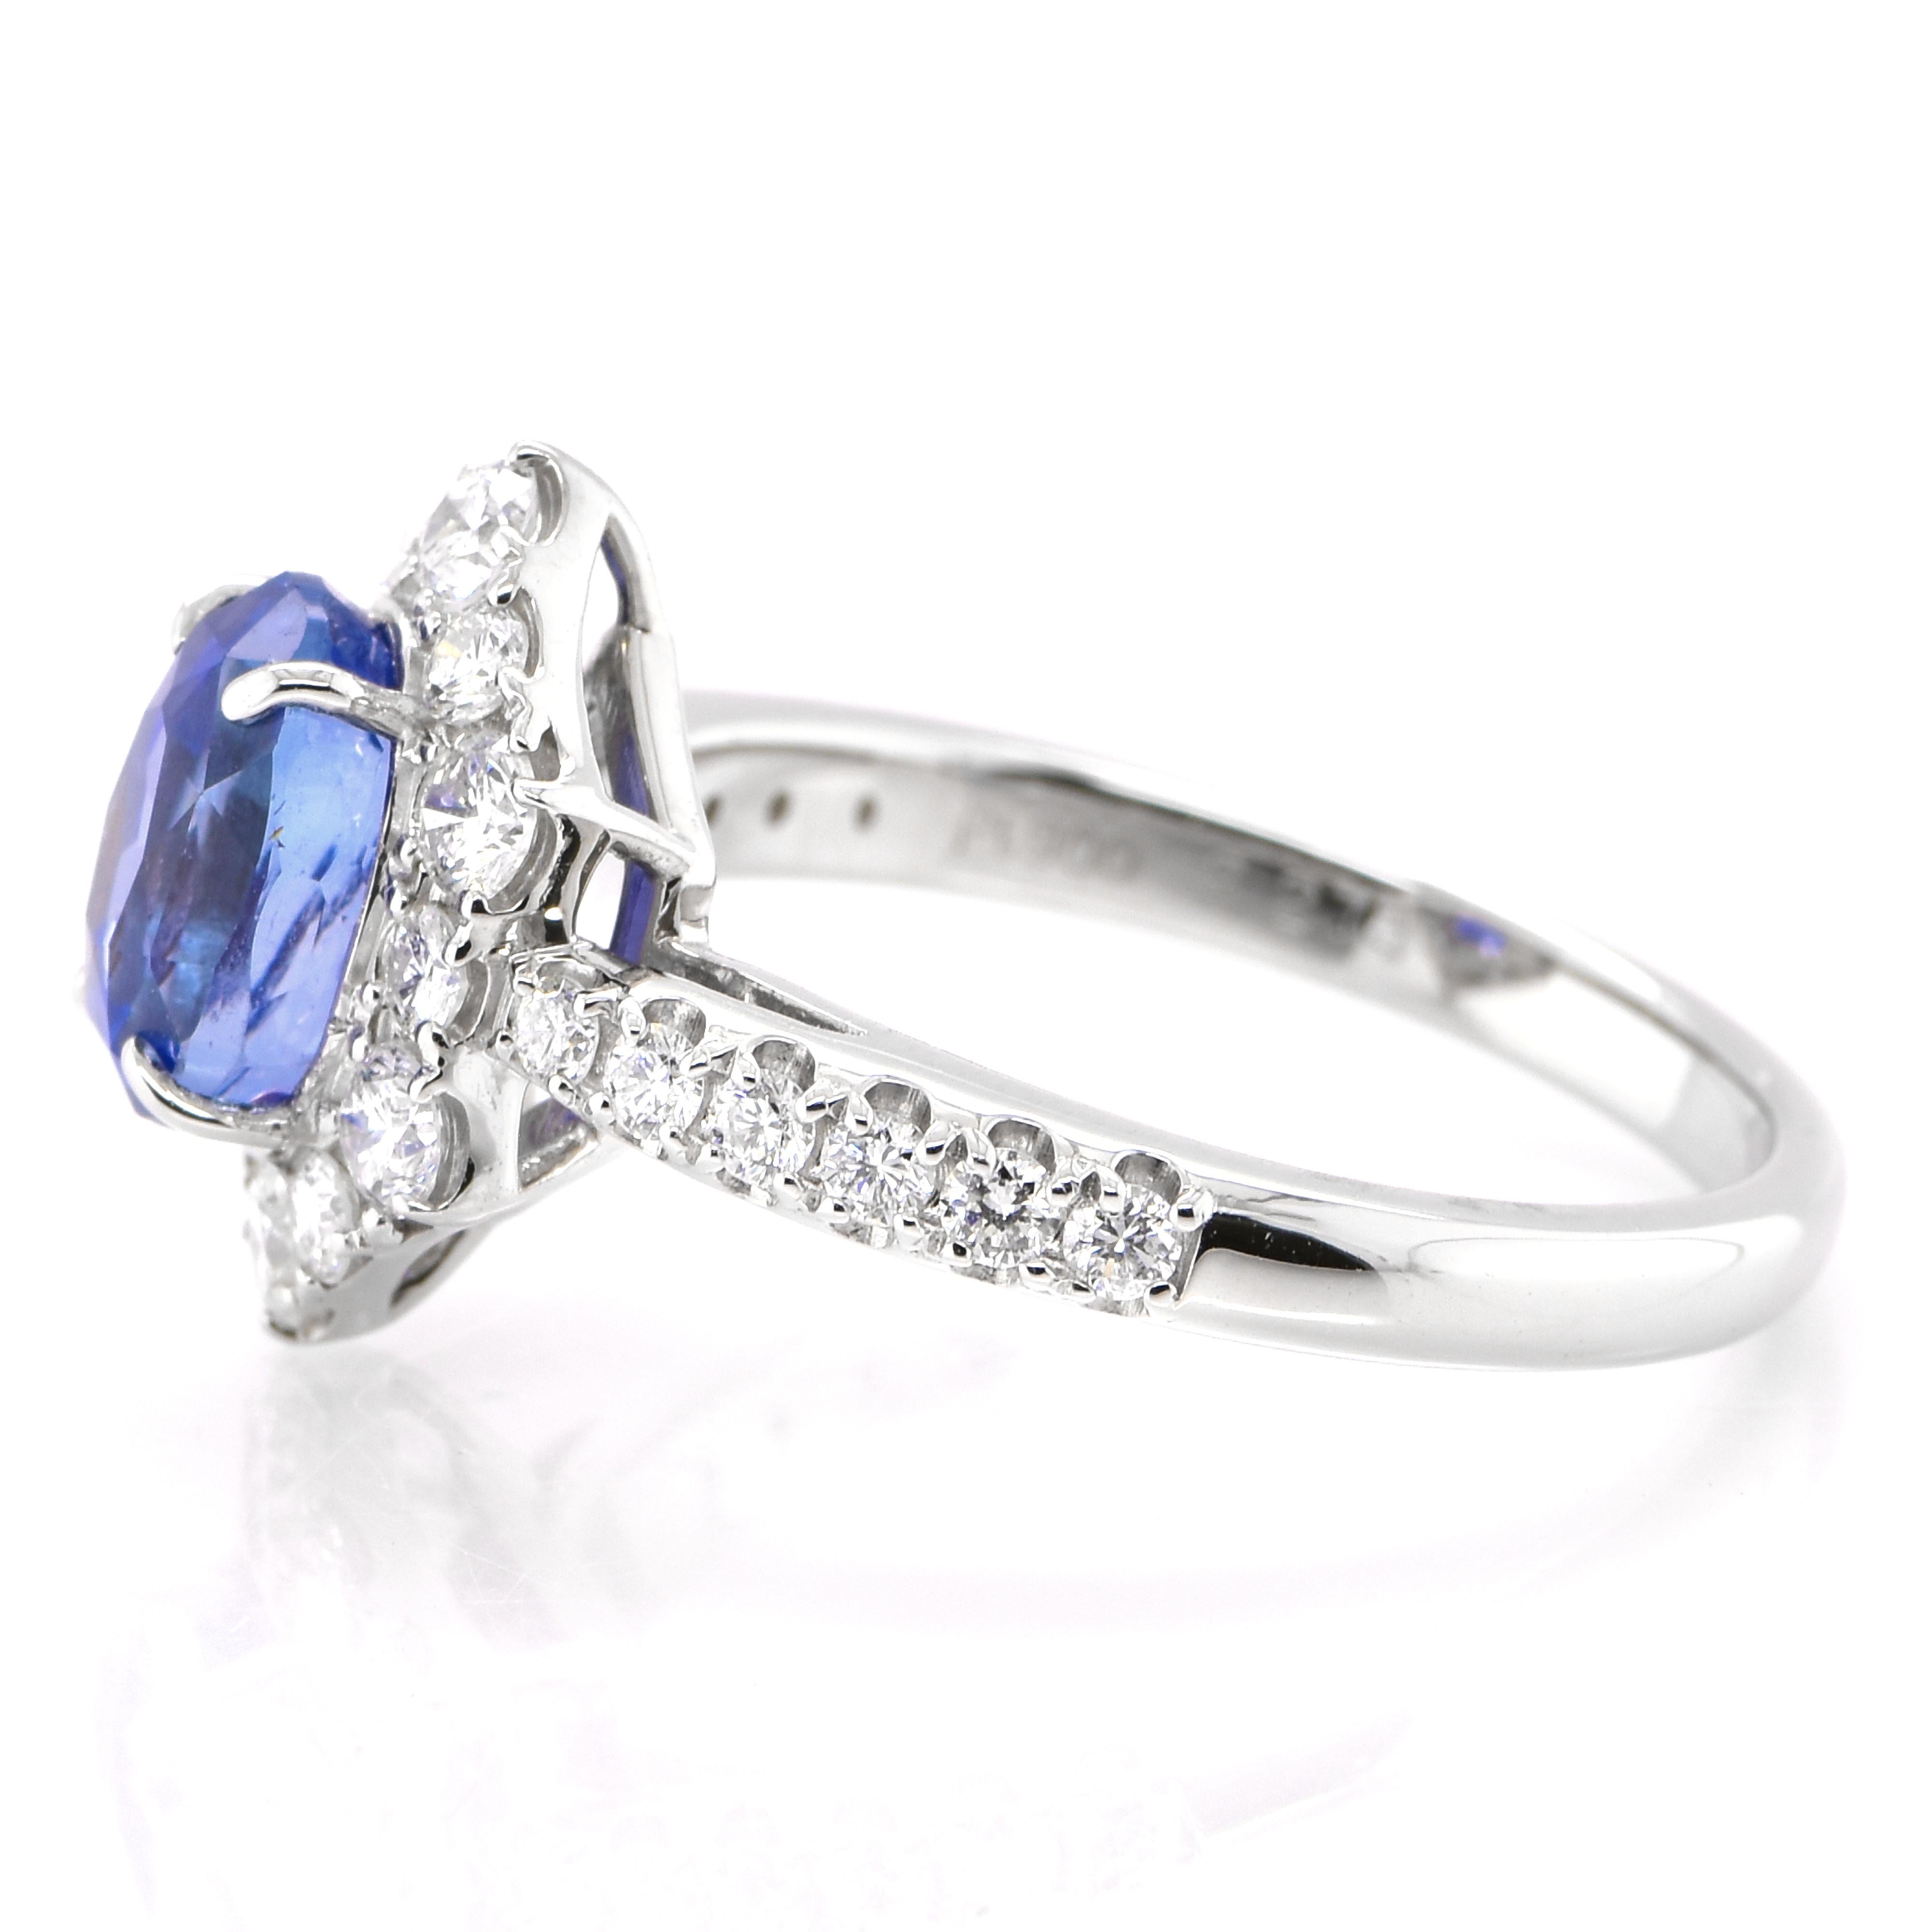 Oval Cut 2.27 Carat Natural Unheated, Ceylon Sapphire and Diamond Ring set in Platinum For Sale